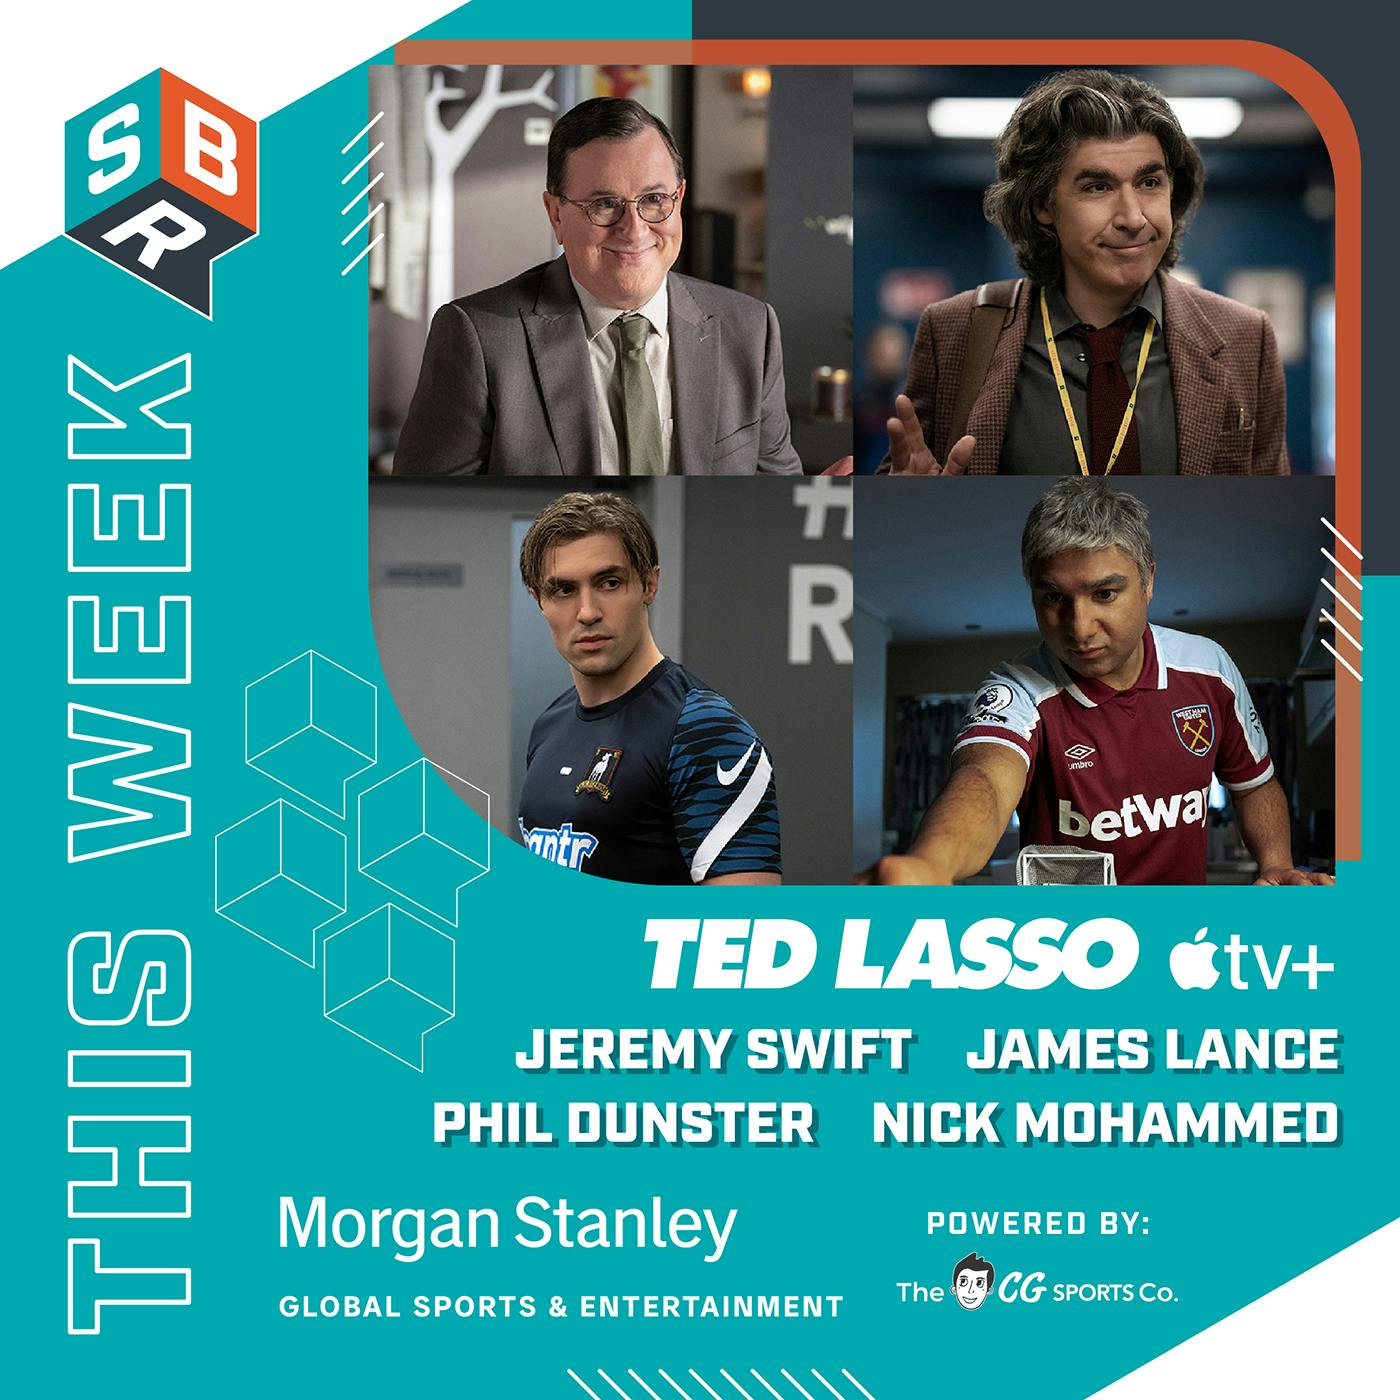 Inside of TED LASSO with Phil Dunster, Nick Mohammed, Jeremy Swift & James Lance